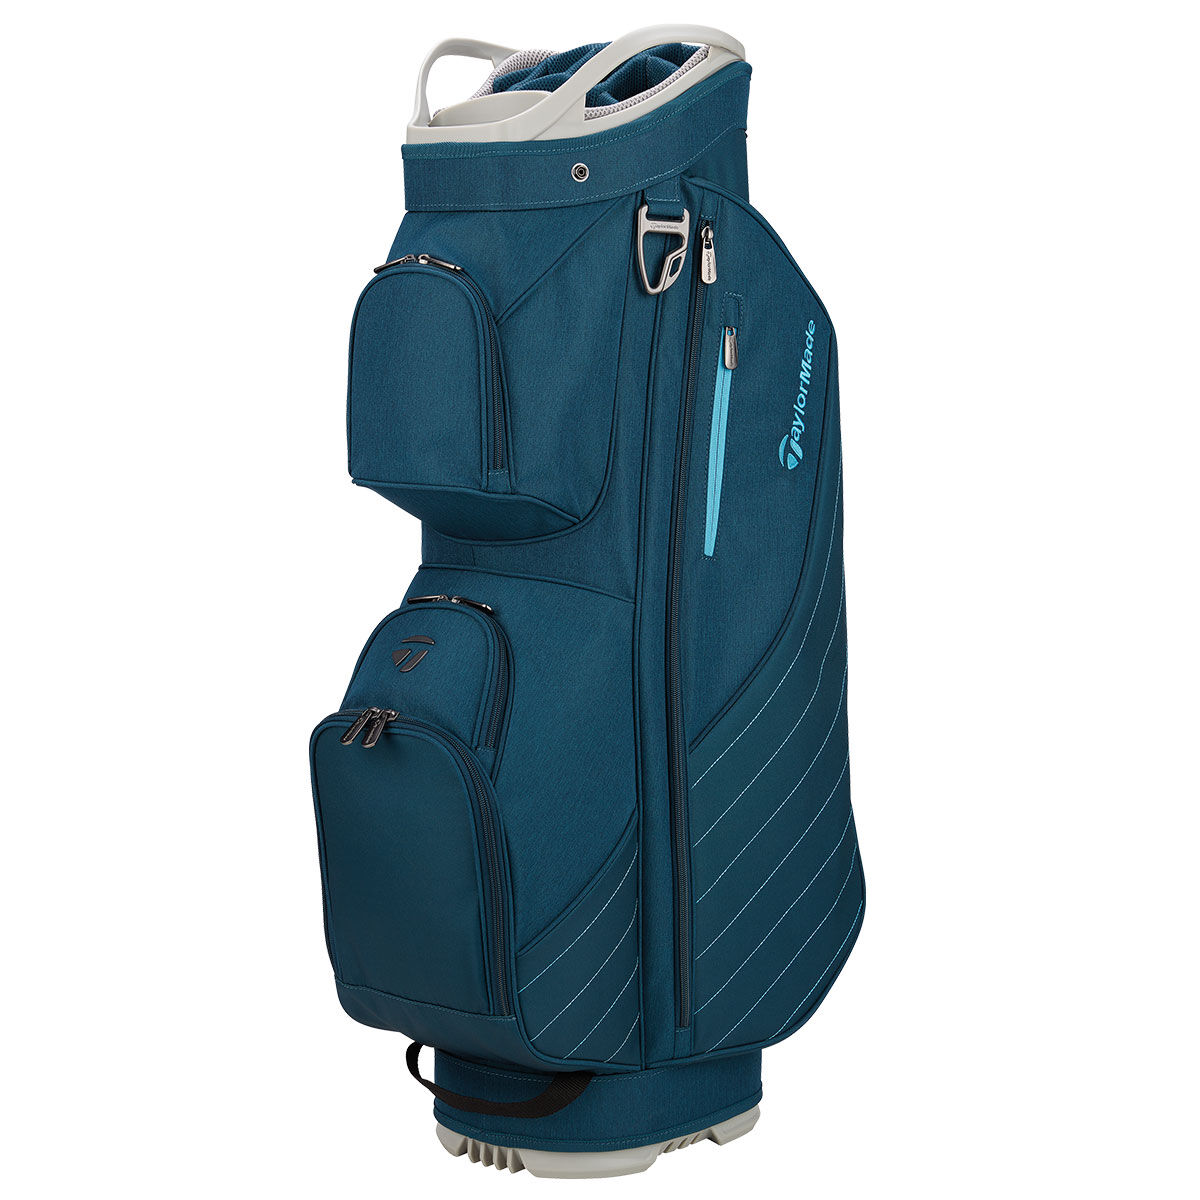 TaylorMade Grey and Navy Blue Lightweight Lanai Golf Cart Bag | American Golf, One Size